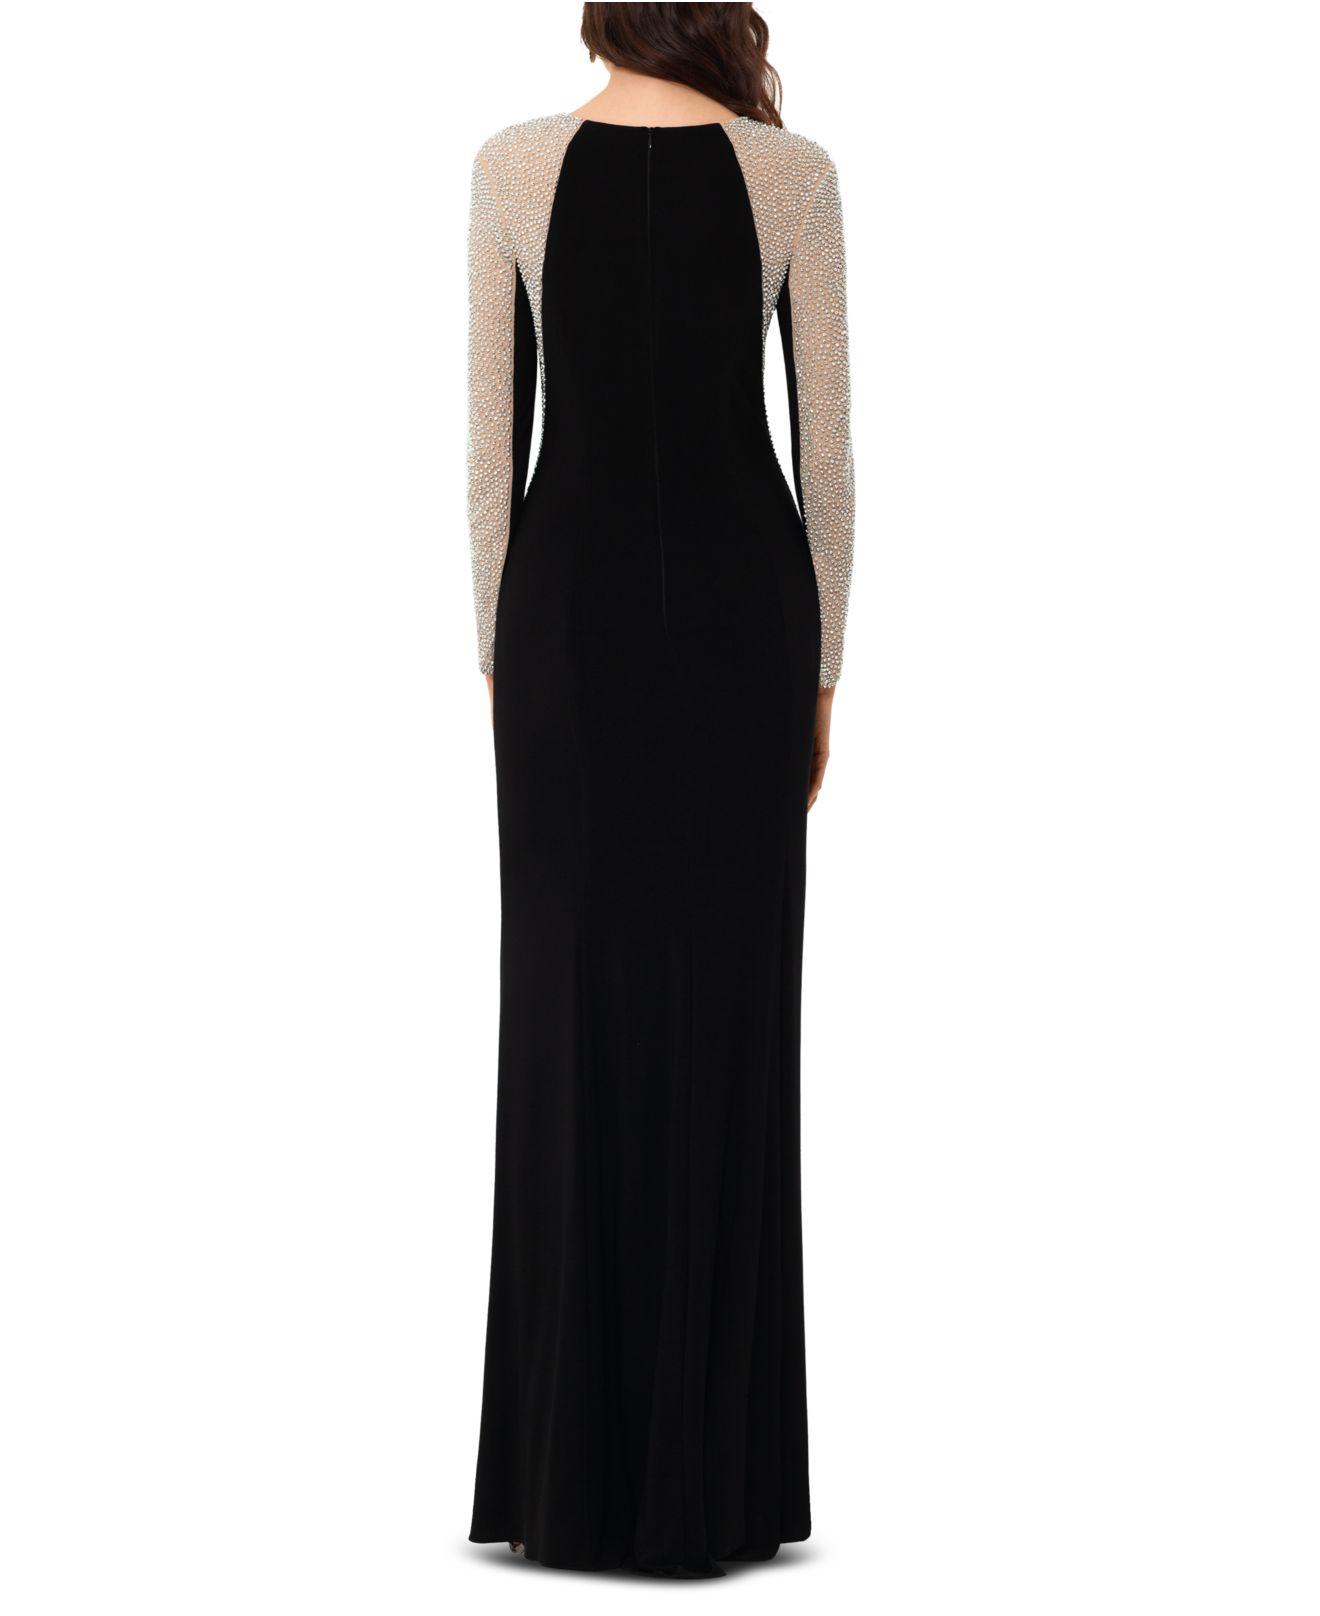 Xscape Embellished Colorblock Gown in Black | Lyst